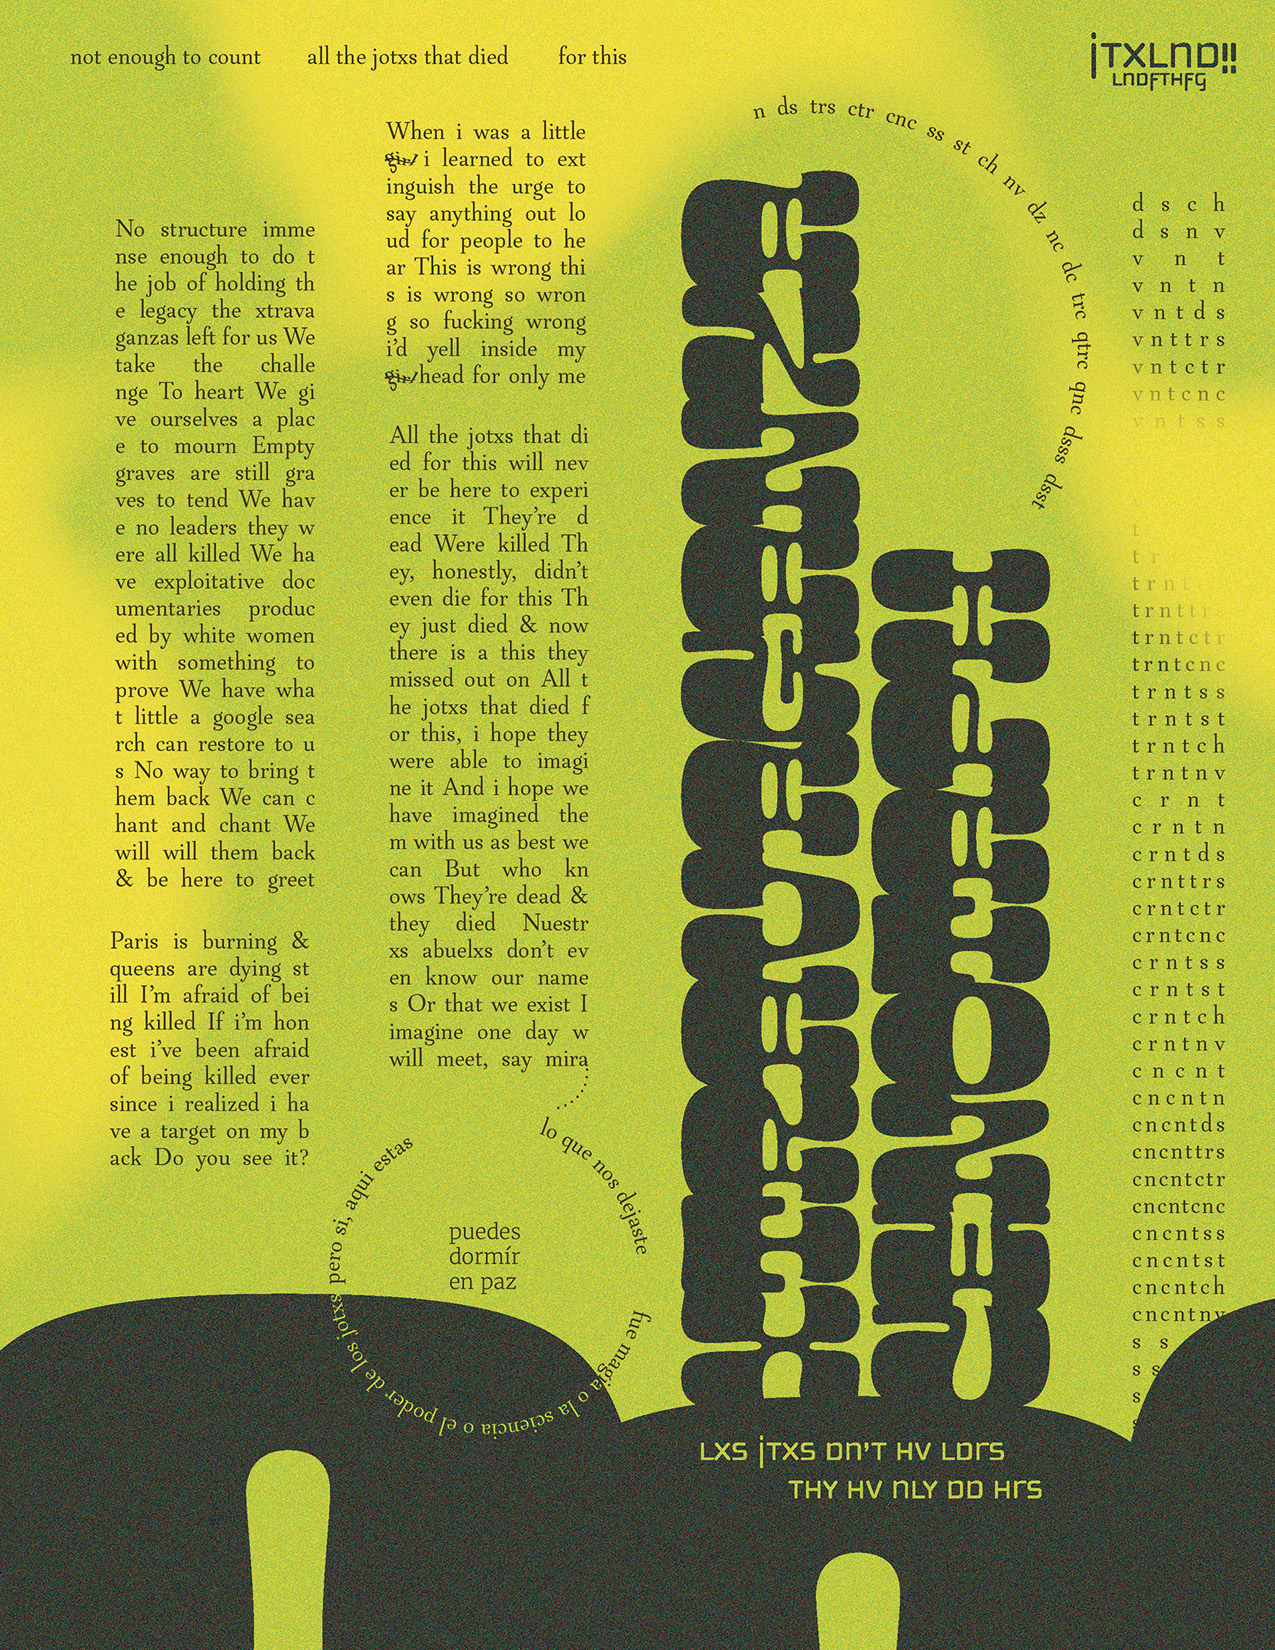 visual poem set in tall skinny columns on a green and yellow background with large abstract text forms